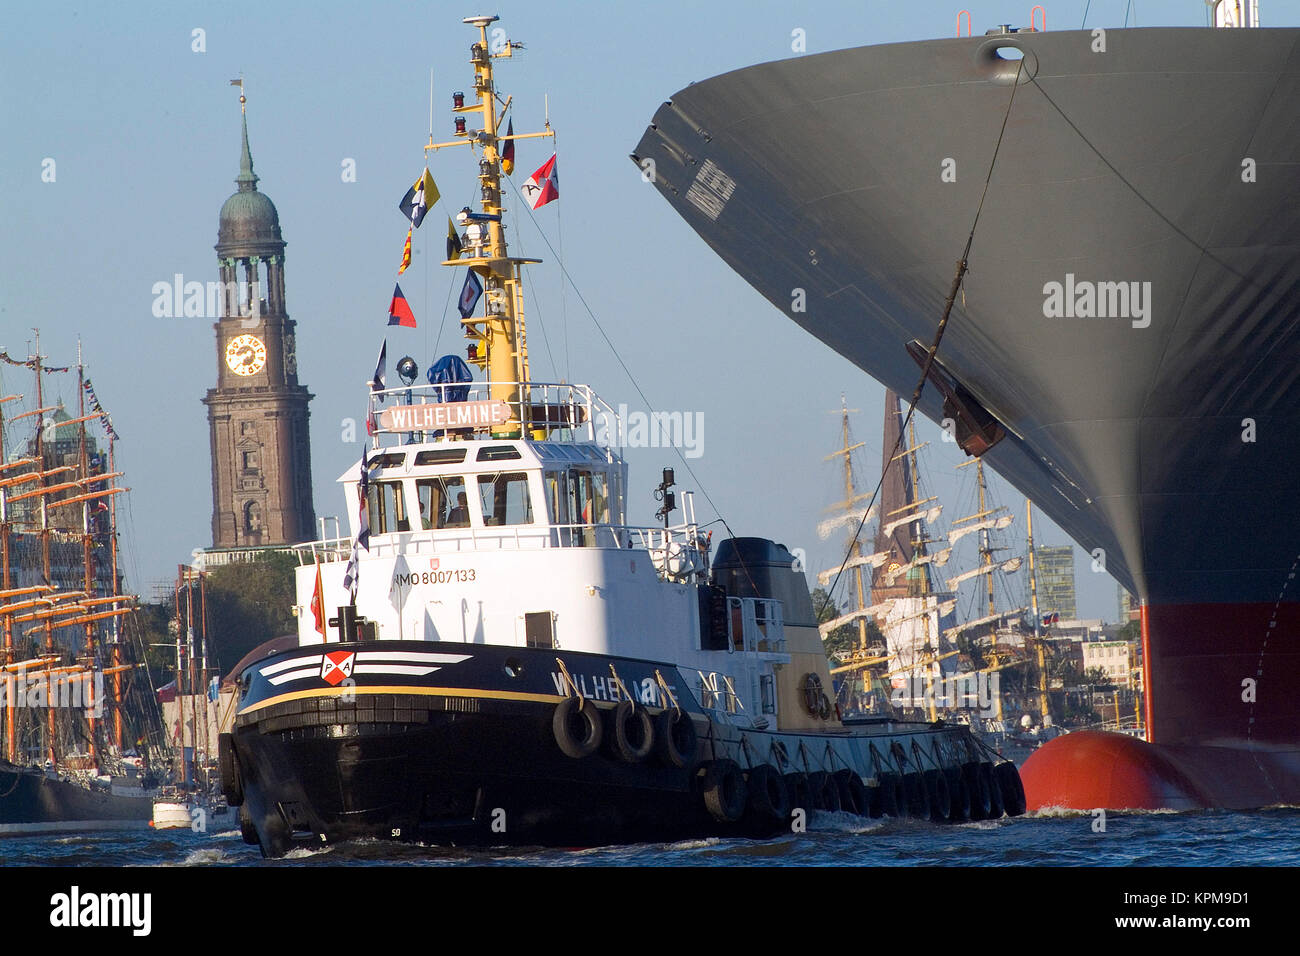 Hamburg, one of the most beautiful and most popular tourist destinations in the world. A harbor tug pulls an ocean liner through the harbor. Stock Photo